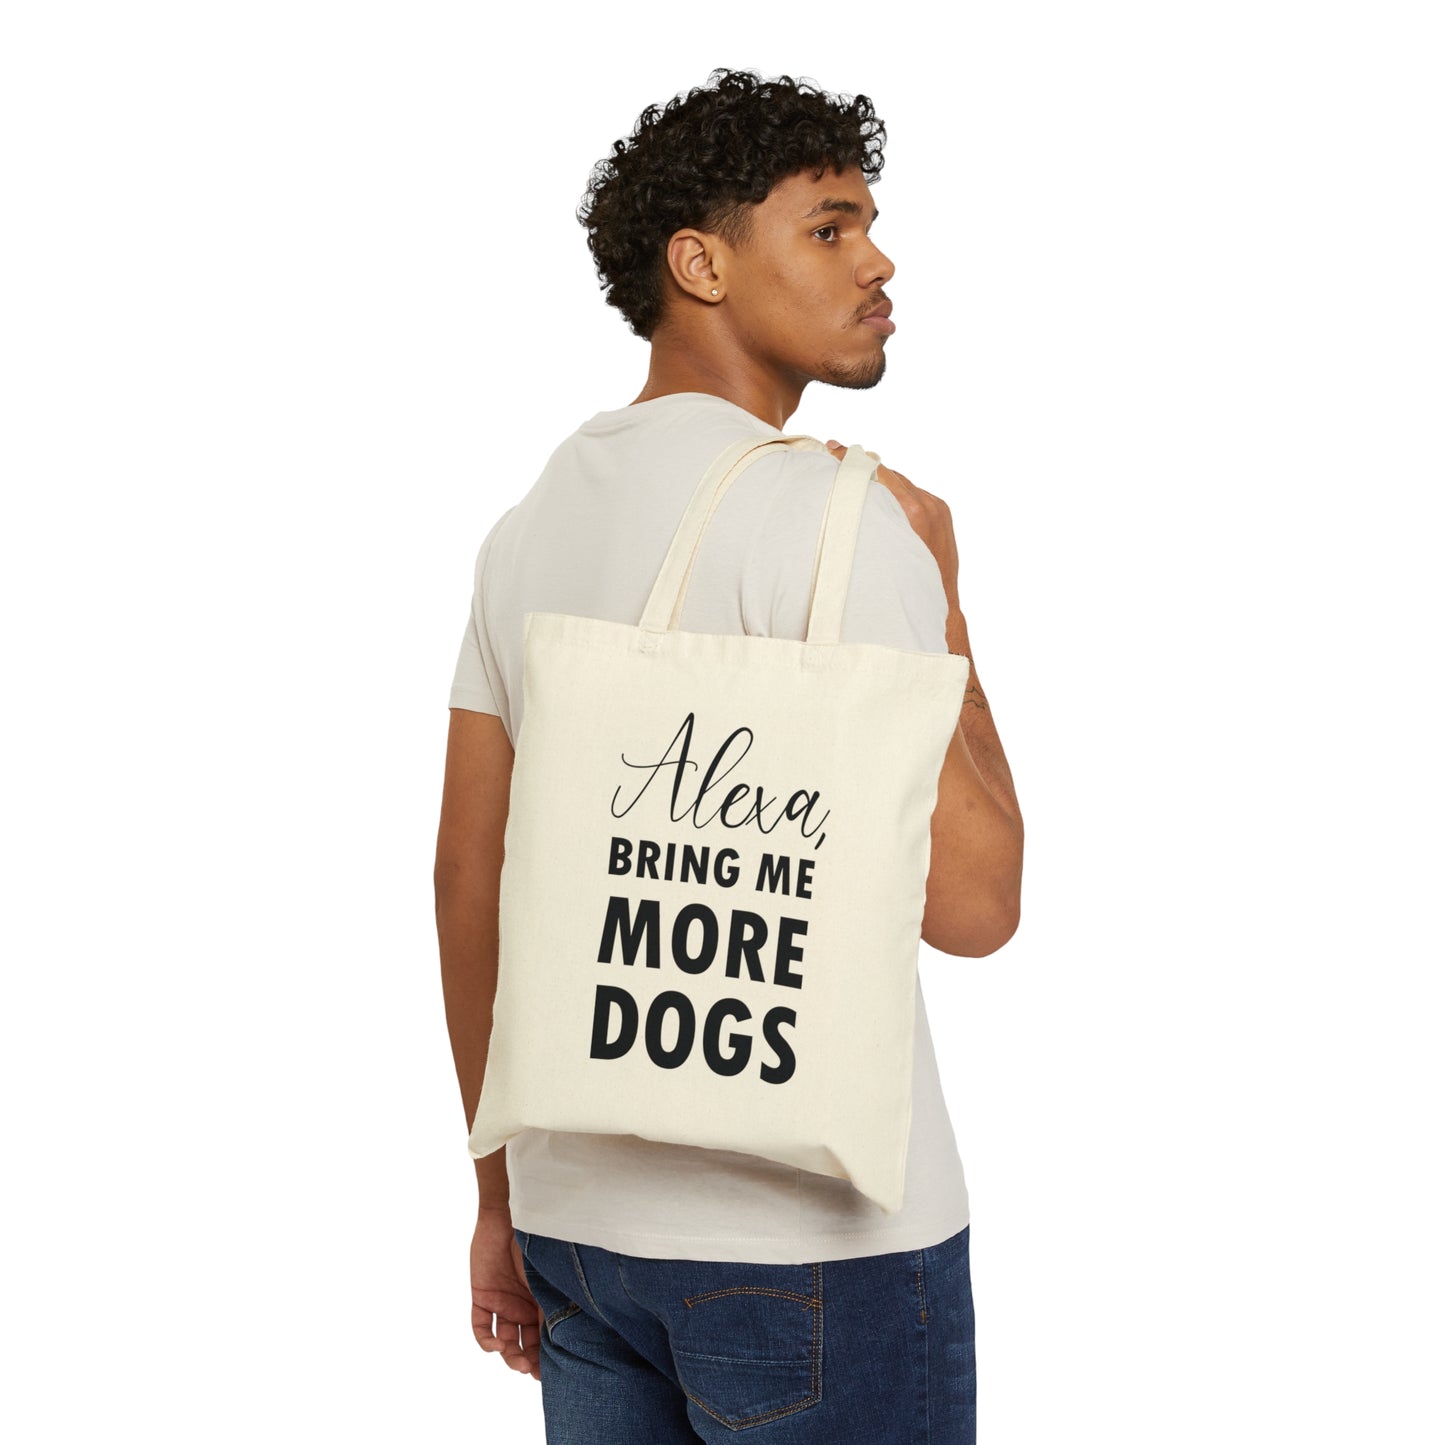 Alexa Bring Me More Dogs Puppy Lovers Quotes Canvas Shopping Cotton Tote Bag